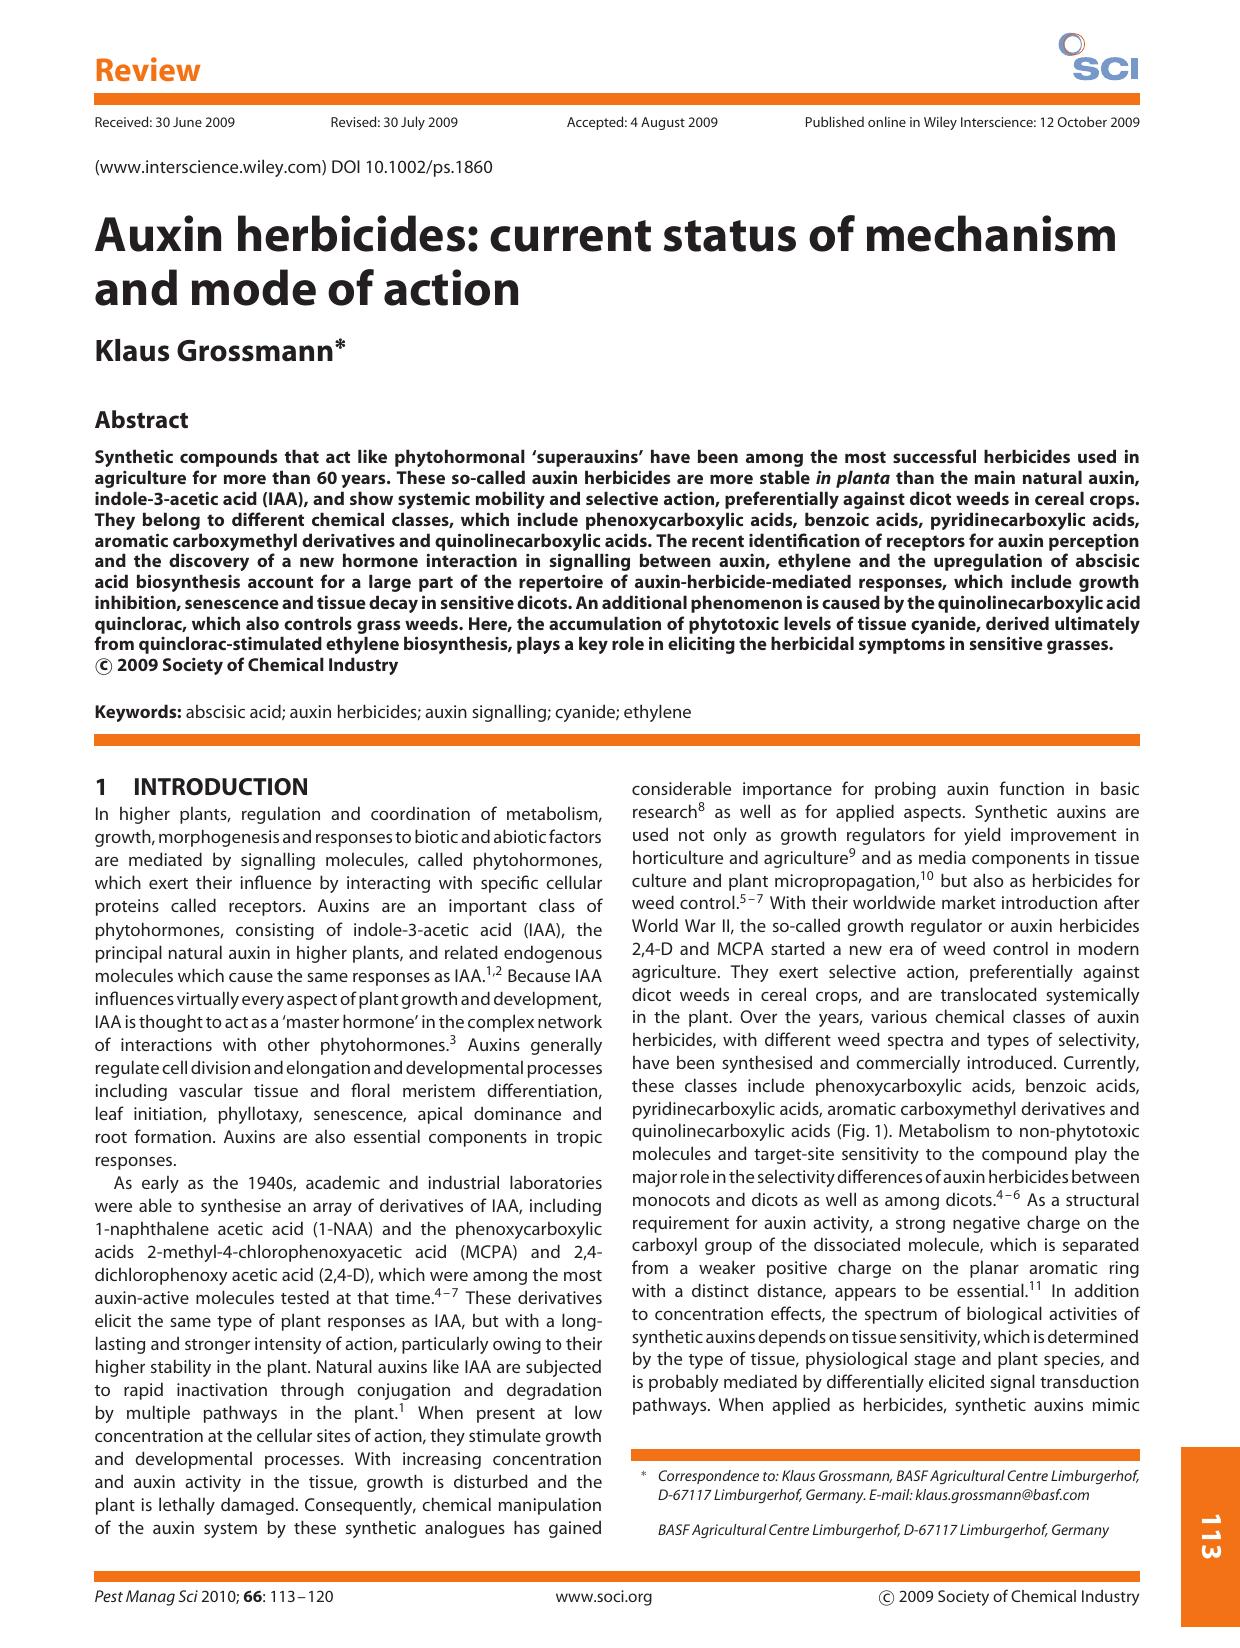 Auxin herbicides: current status of mechanism and mode of action by Unknown